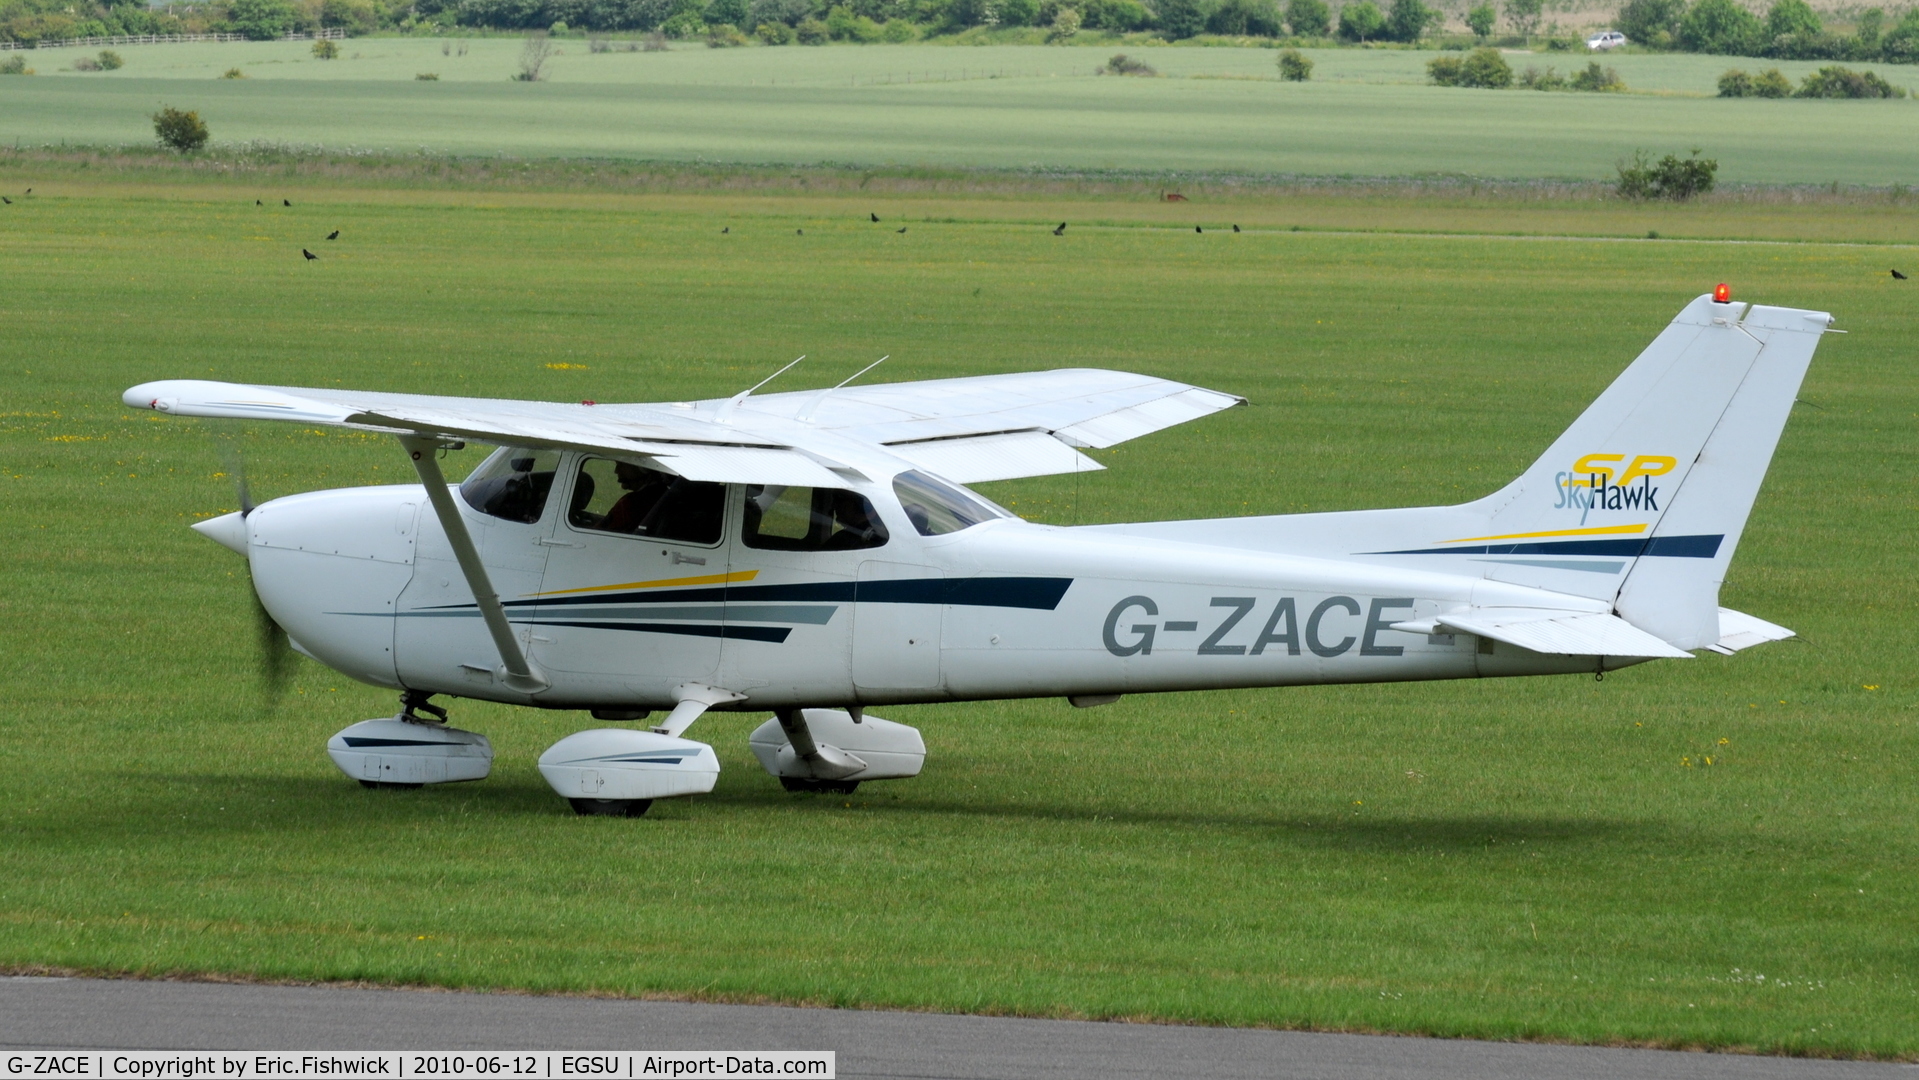 G-ZACE, 2001 Cessna 172S C/N 172S8808, 1. G-ZACE at The Duxford Trophy Aerobatic Contest, June 2010